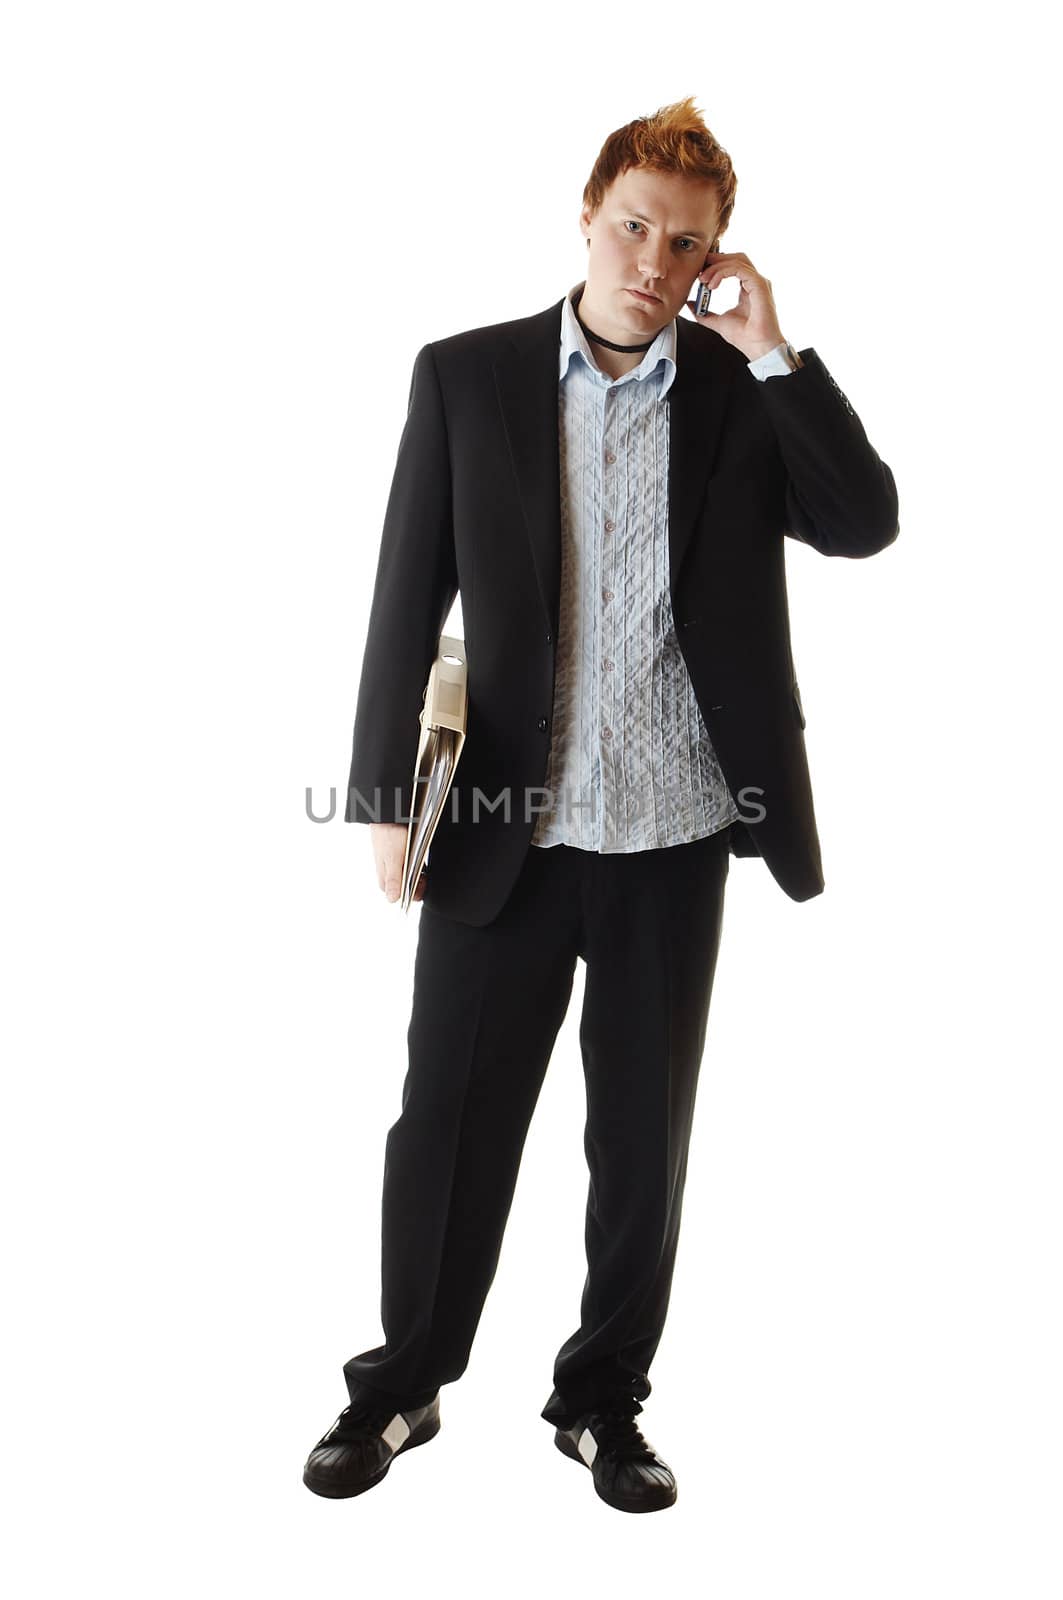 Business man holding a book and talking on a phone